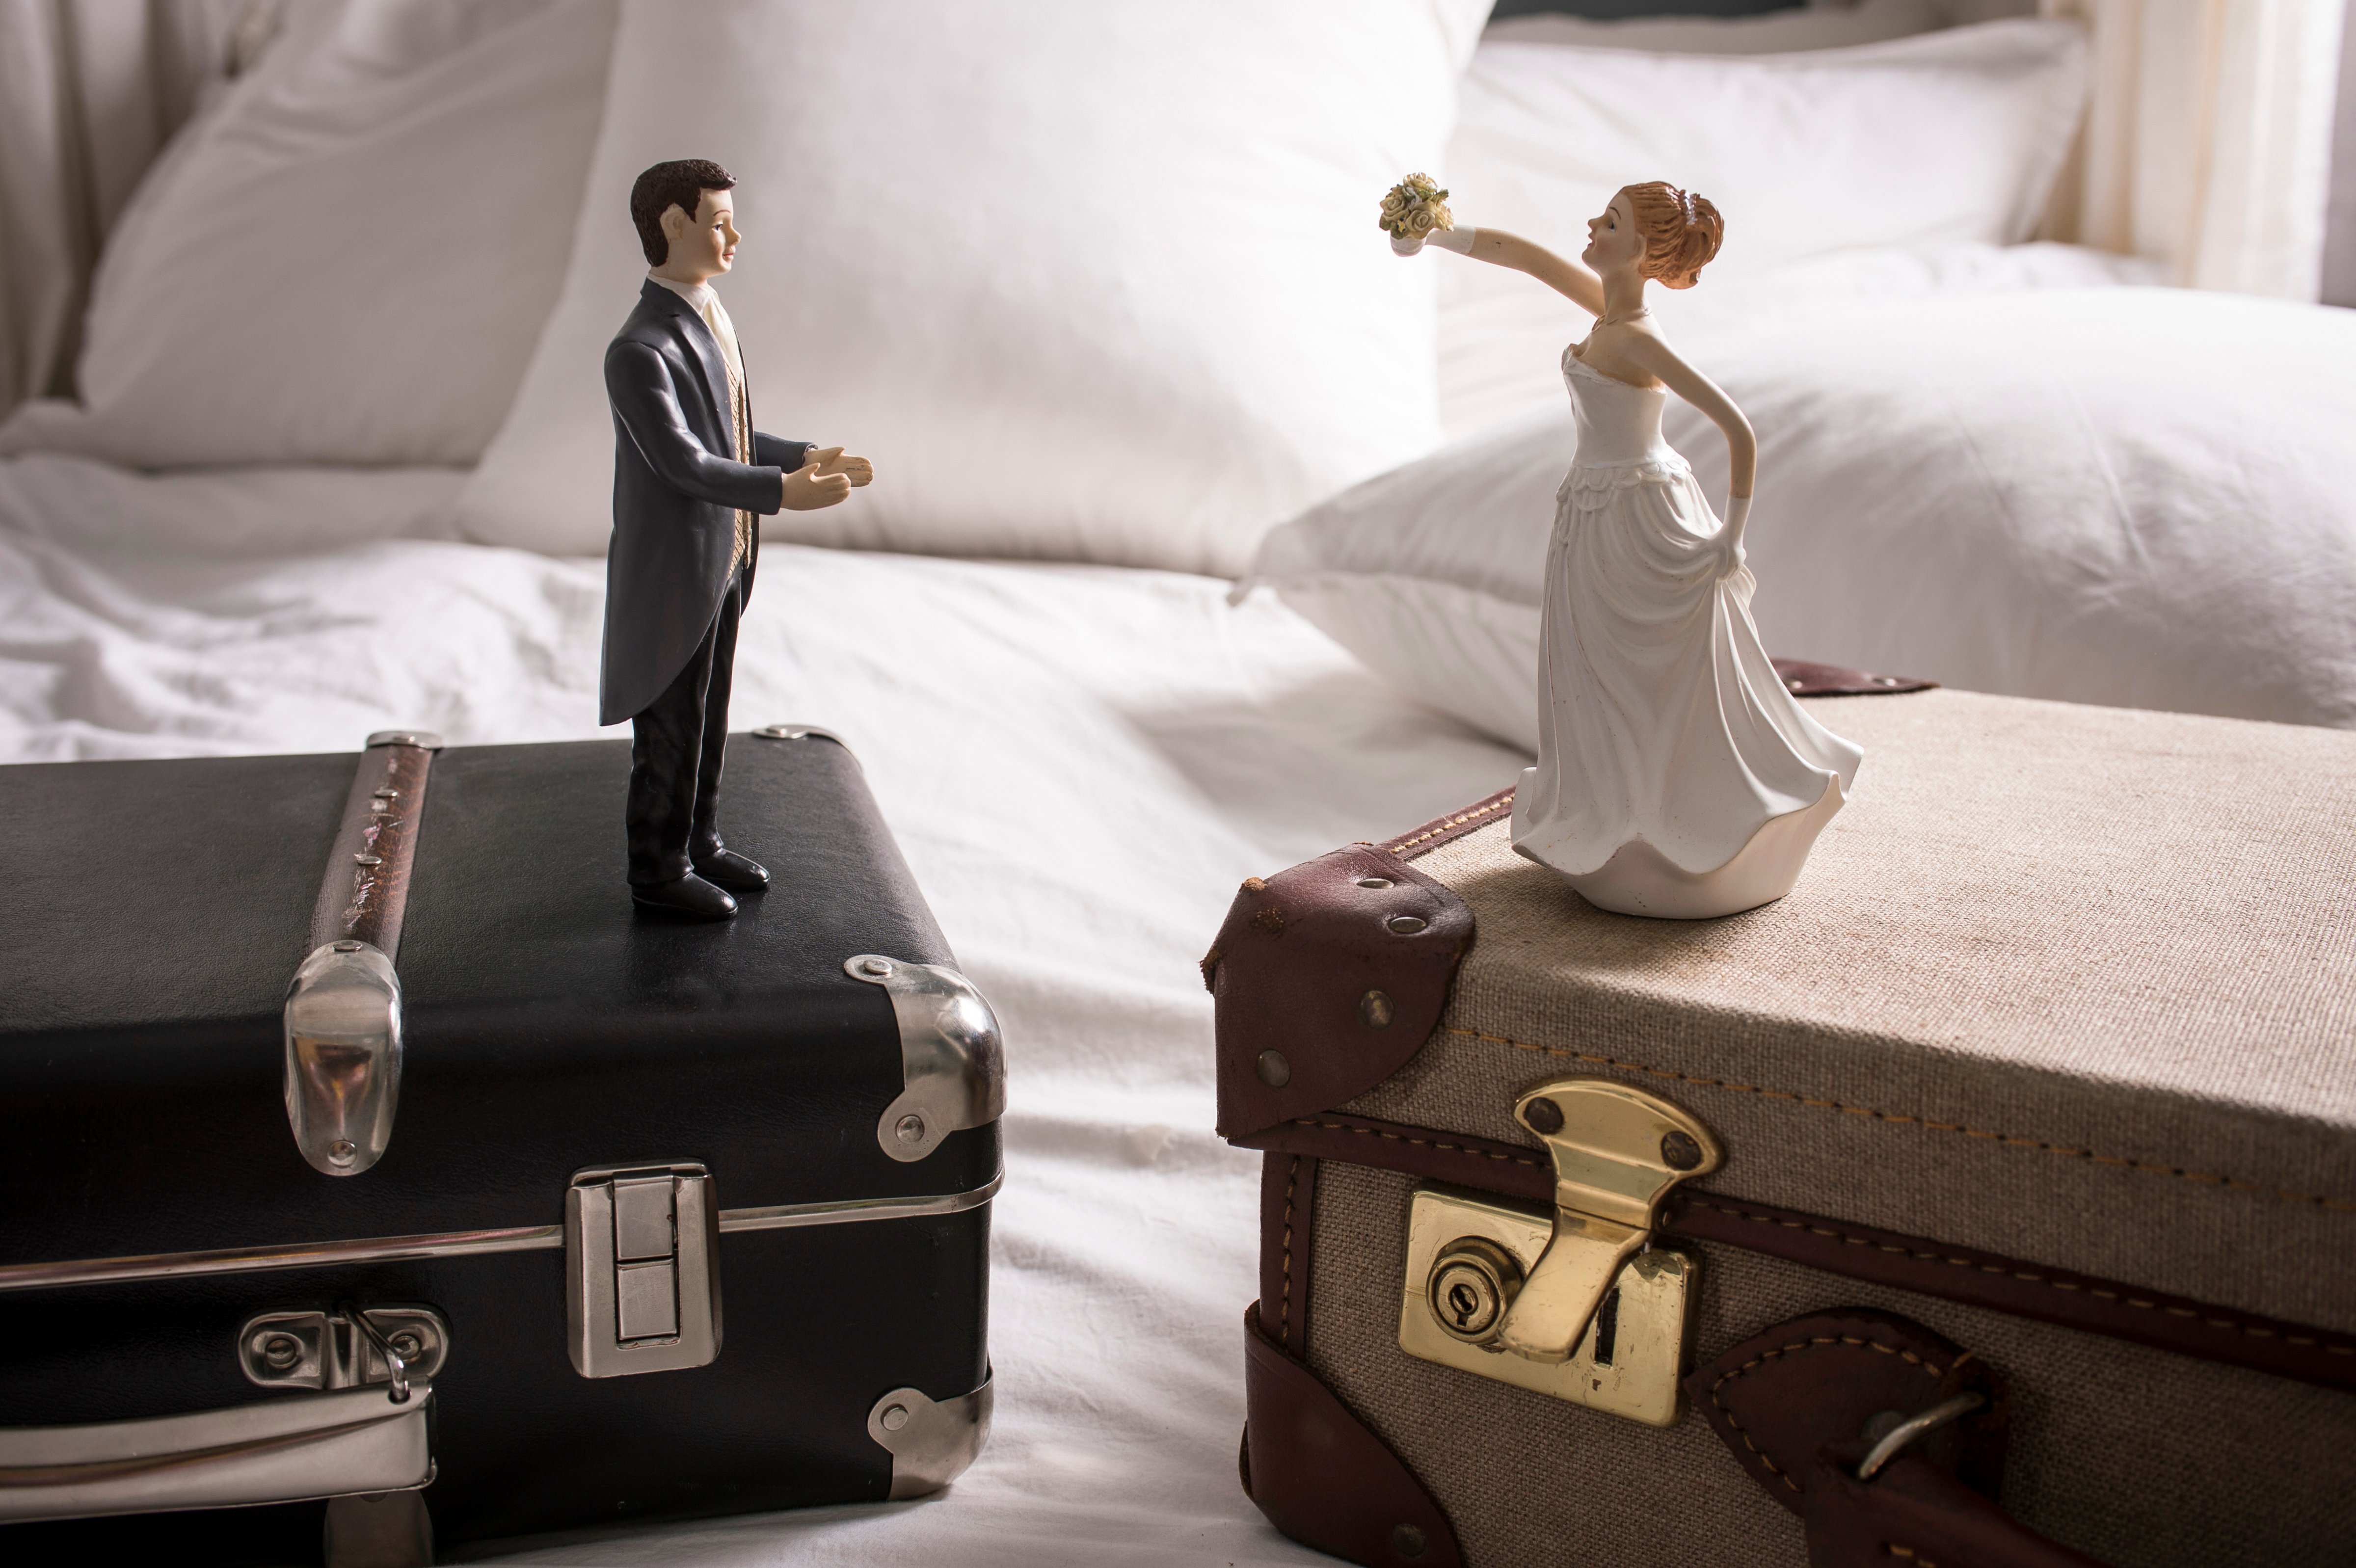 Wedding figurines on separate suitcases (Getty Images)